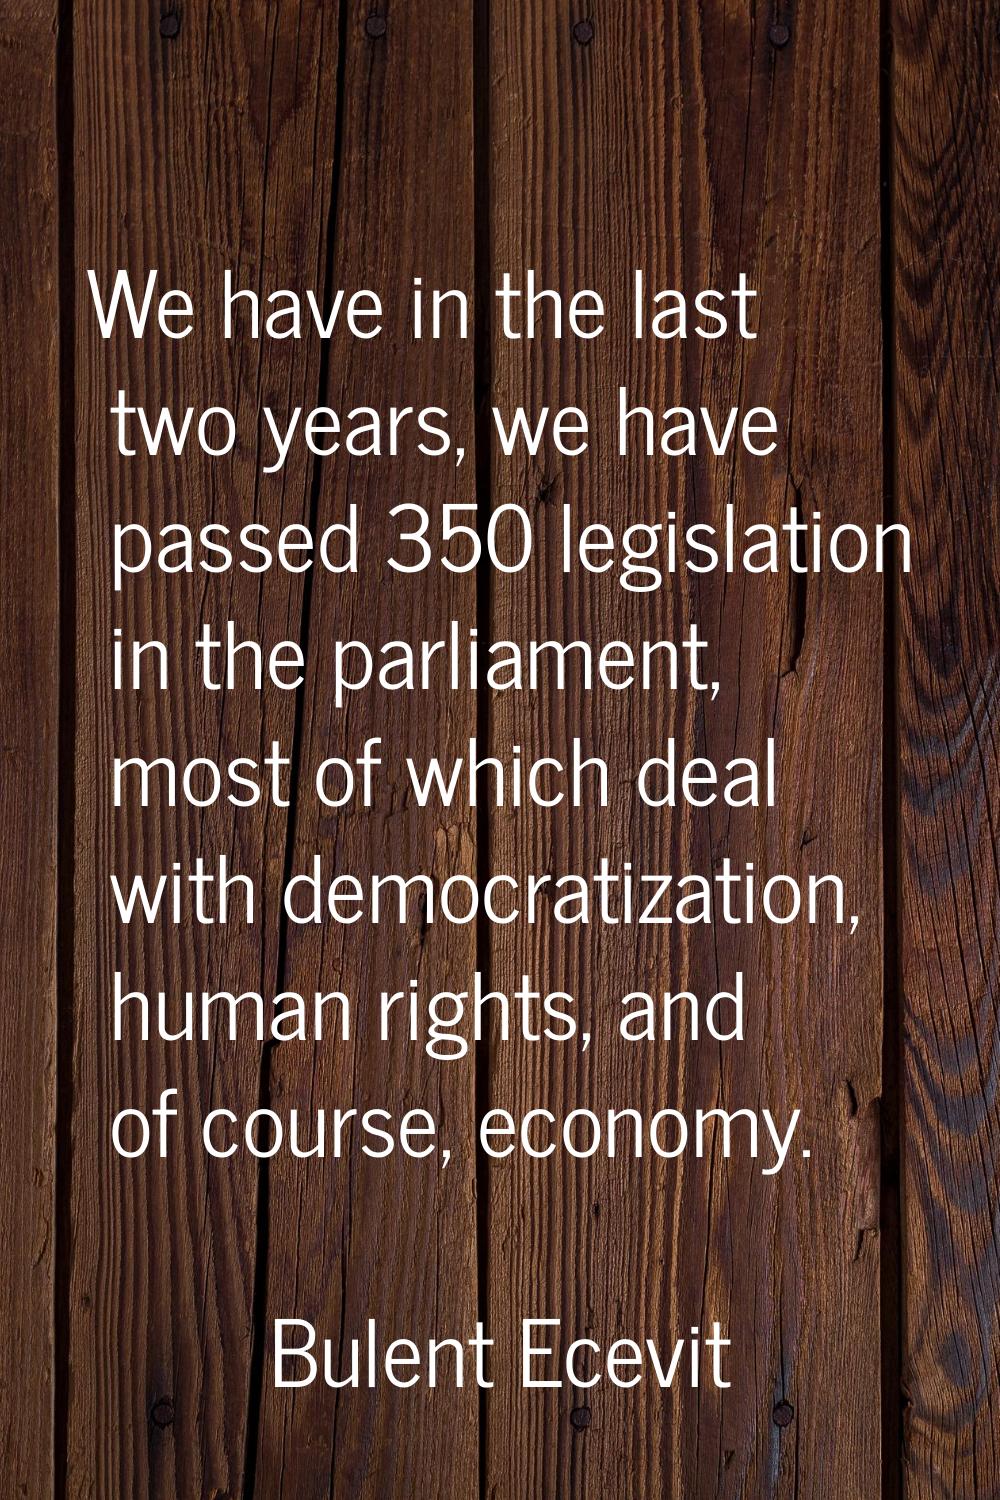 We have in the last two years, we have passed 350 legislation in the parliament, most of which deal